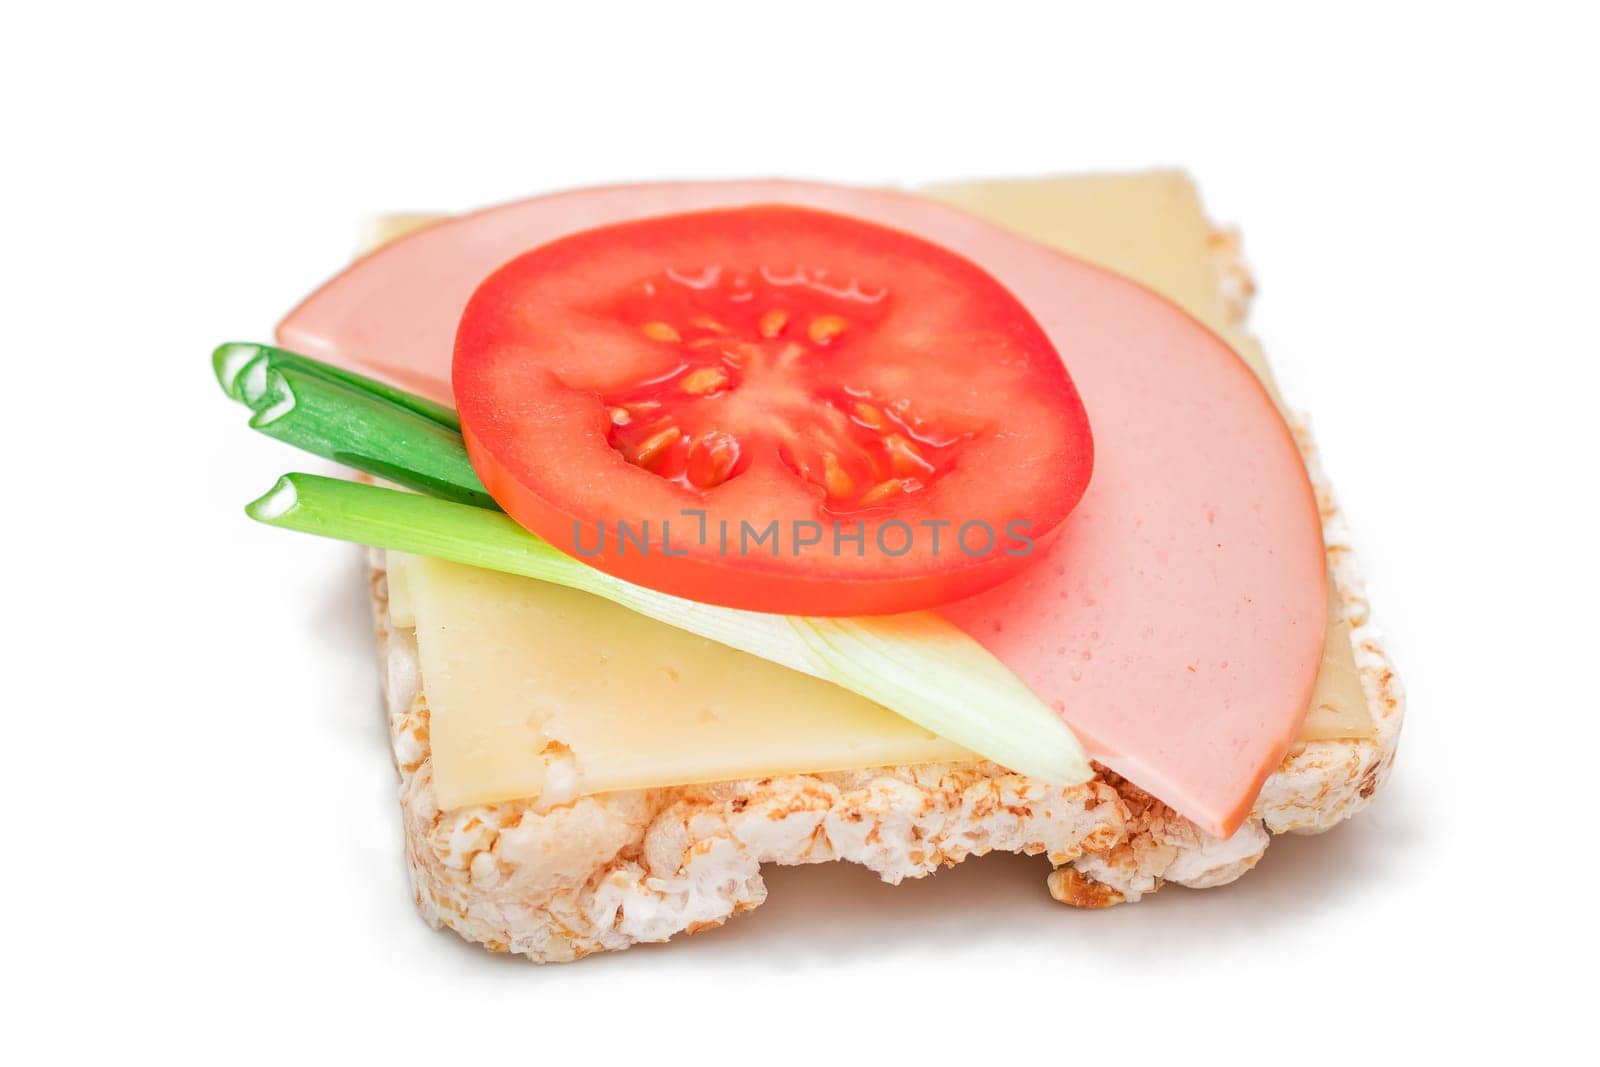 Rice Cake Sandwich with Tomato, Sausage, Green Onions and Cheese - Isolated by InfinitumProdux